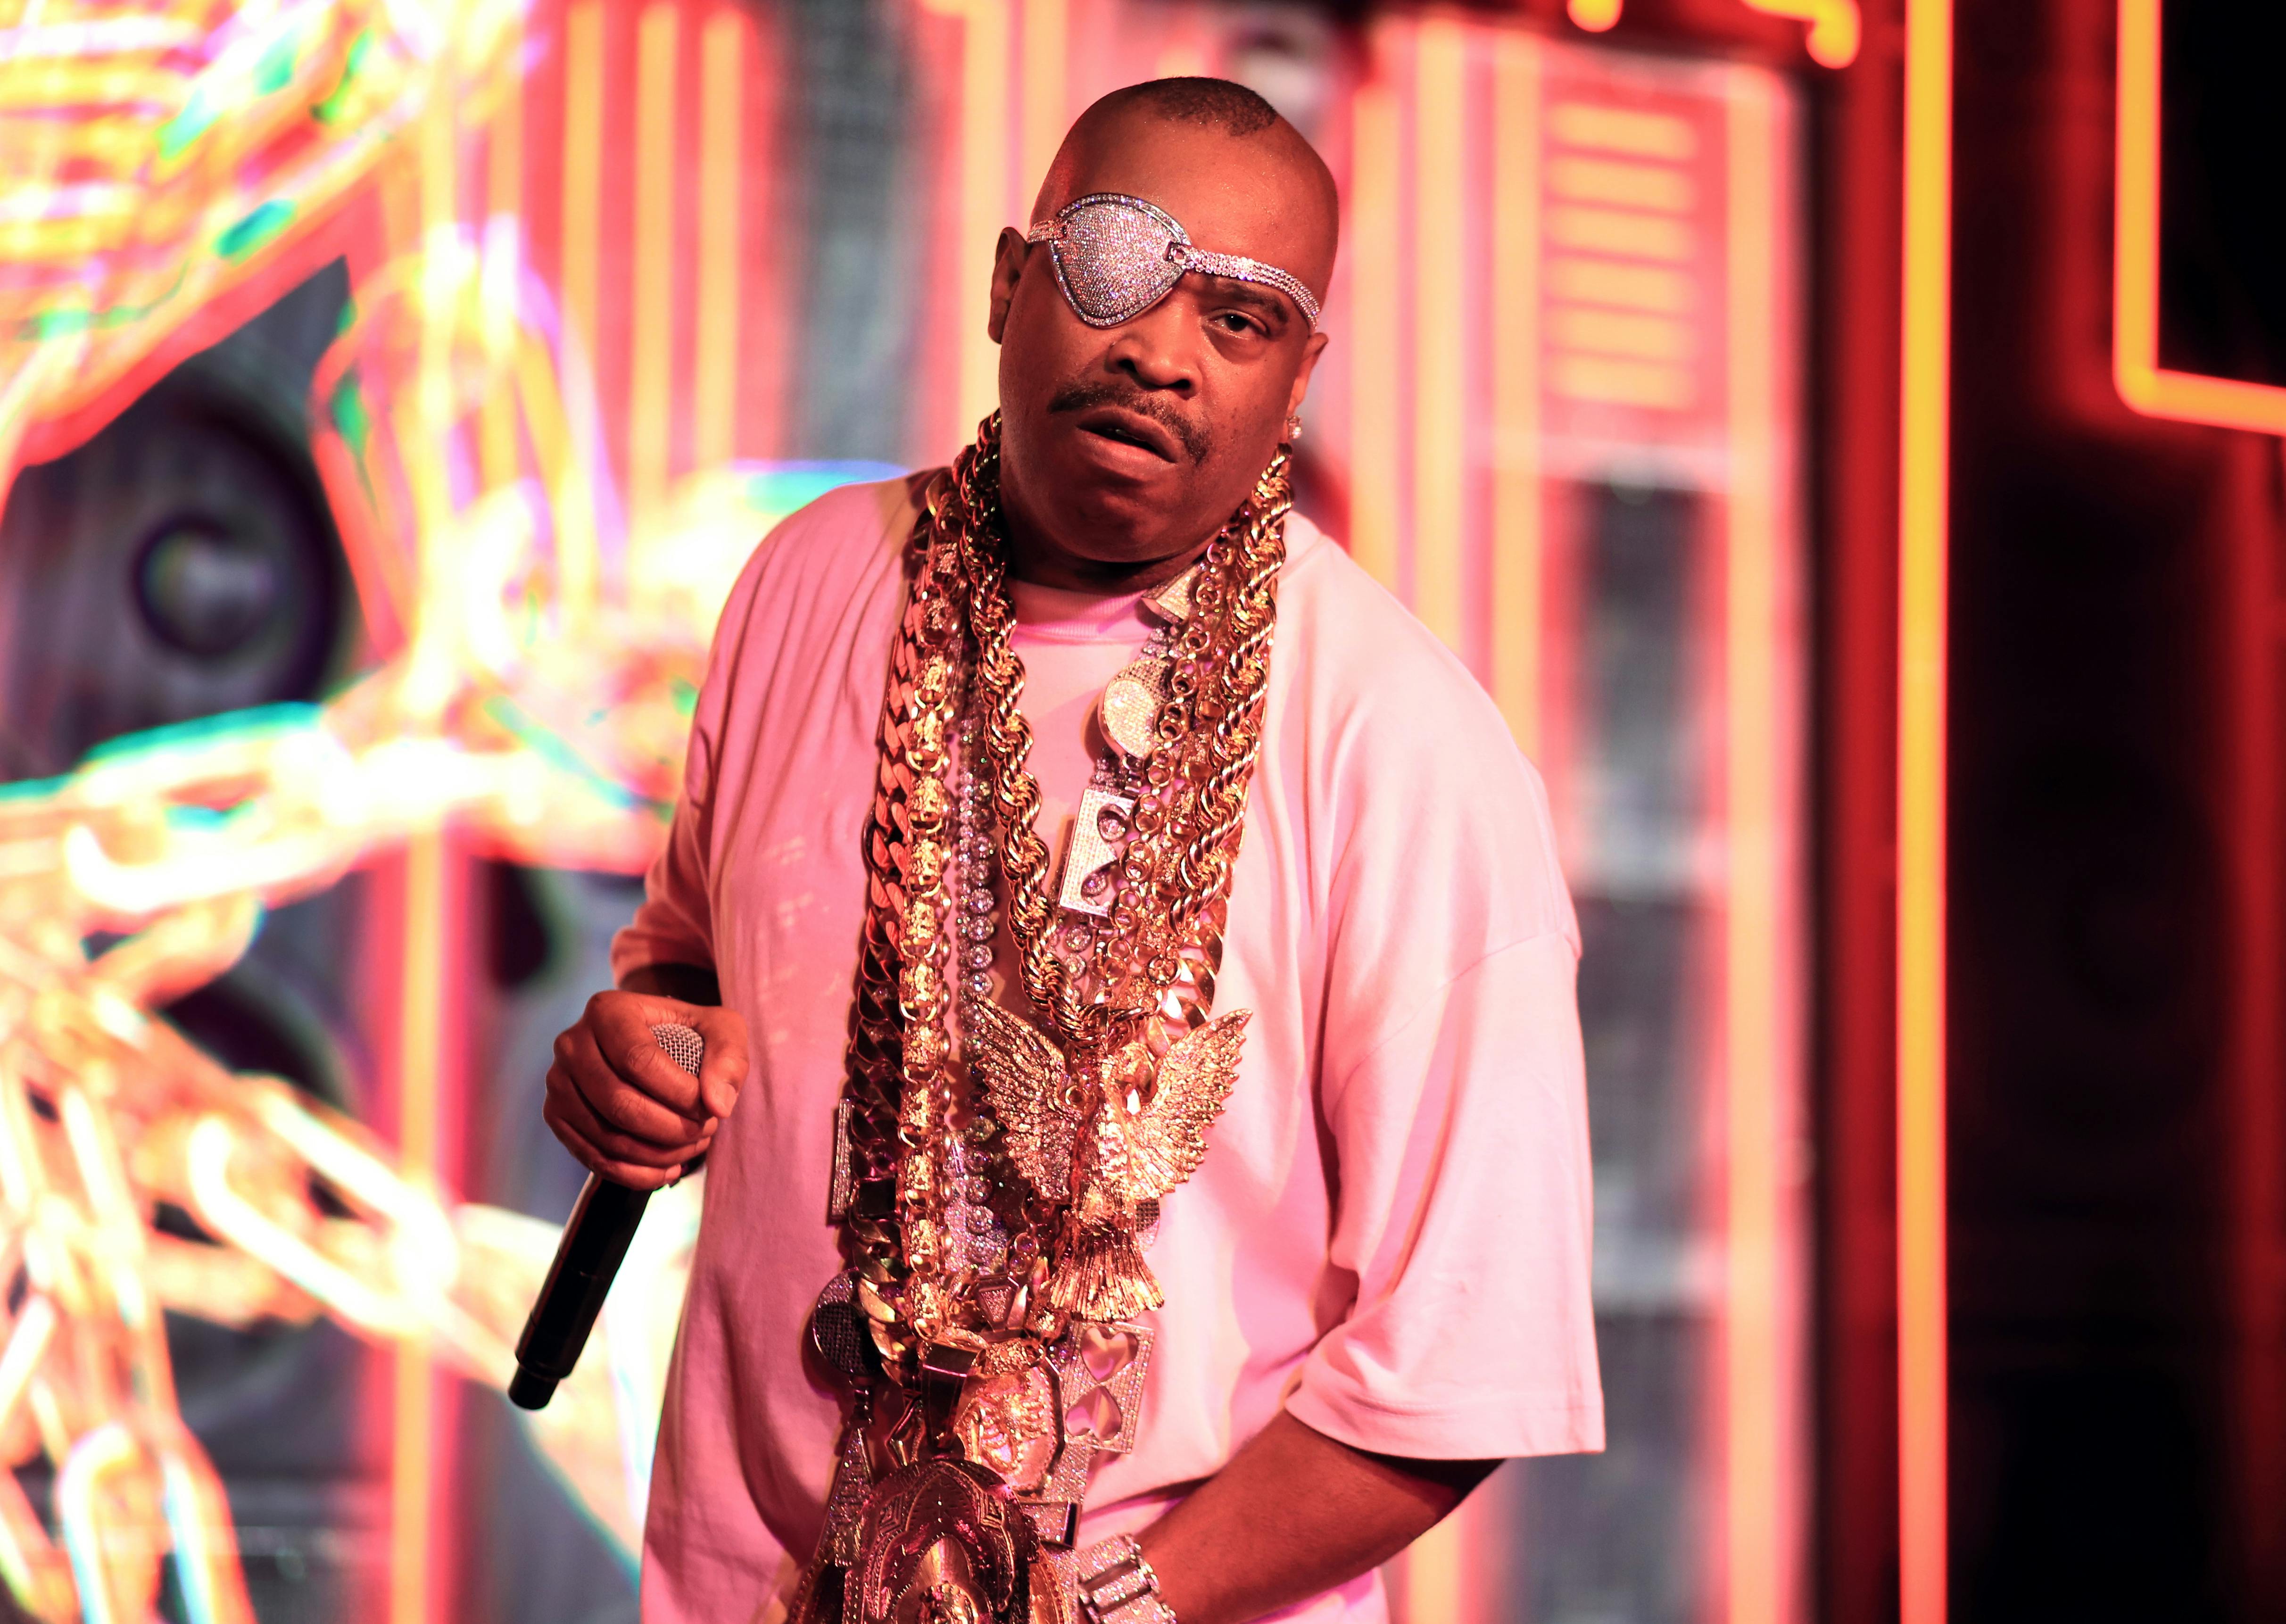 Slick Rick performs onstage during #TBT Night Presented By BuzzFeed at Mastercard House on January 25, 2018 in New York City.